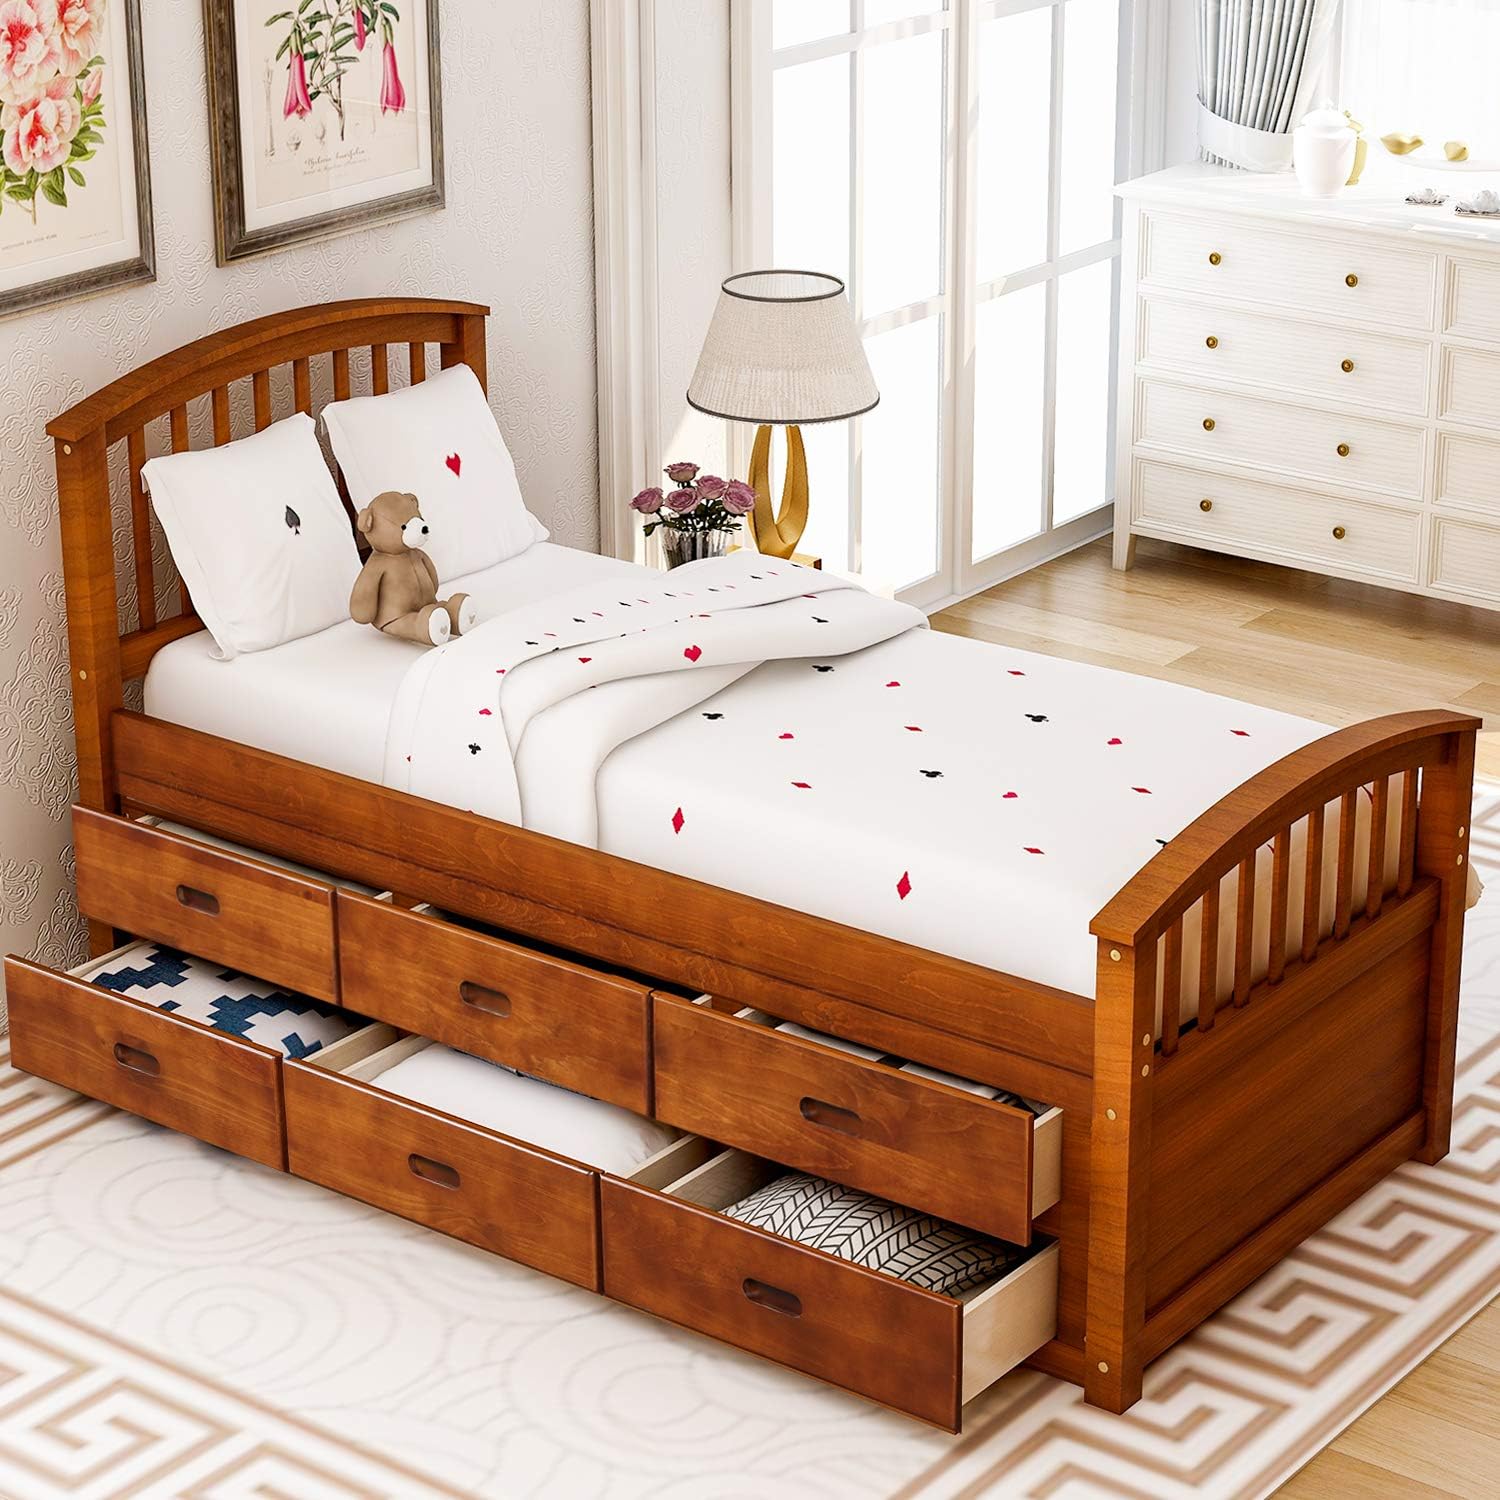 Storage Beds With Built in Drawers